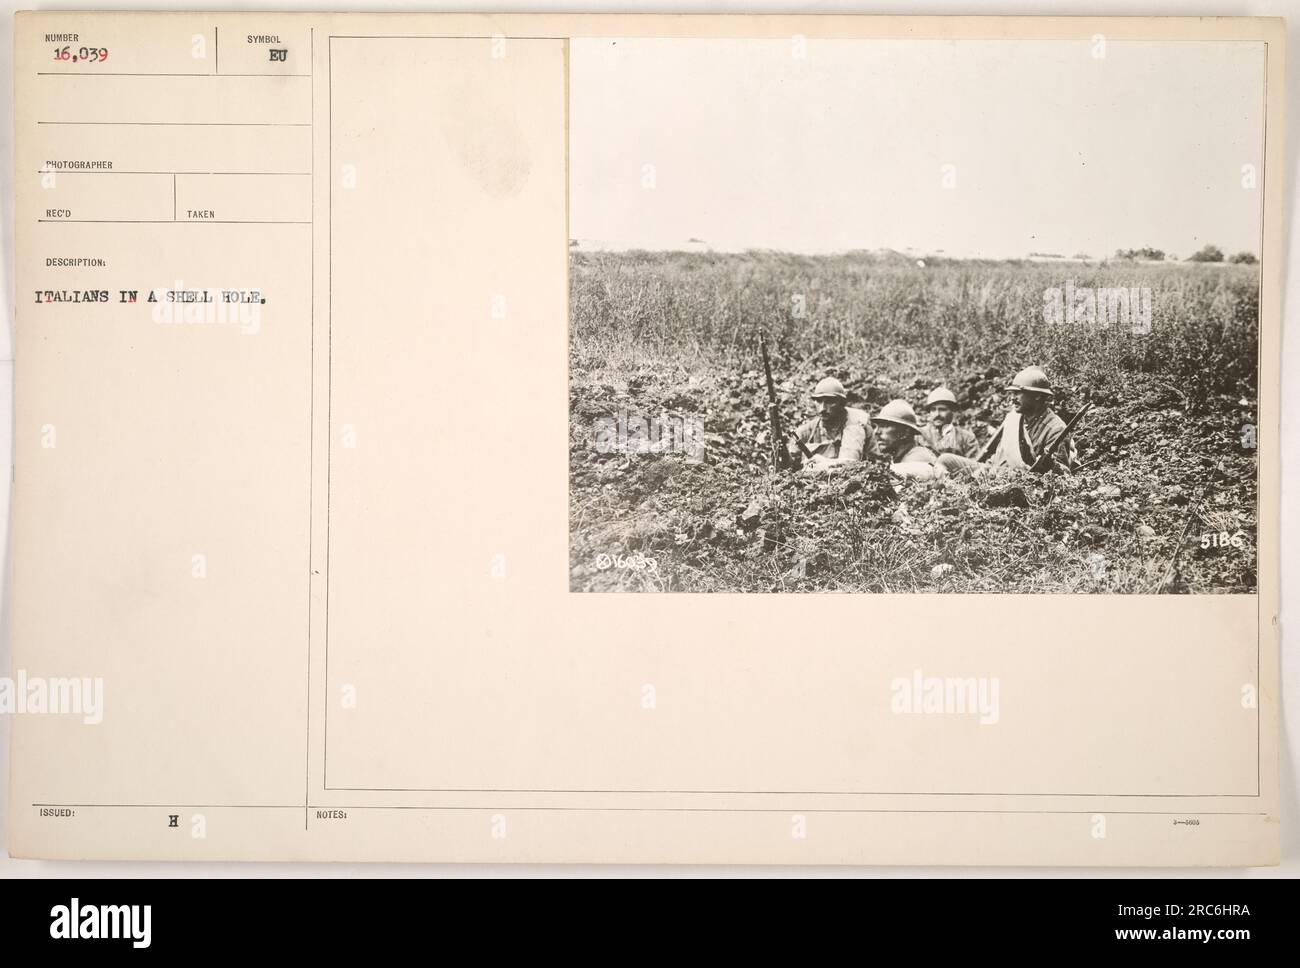 This photograph, numbered 16,039 in the collection, is a black and white image taken by an American photographer during World War One. It shows a group of Italian soldiers huddled in a shell hole. The photo bears the symbol 'H' and the notes indicate that it was captured in Italy. Stock Photo